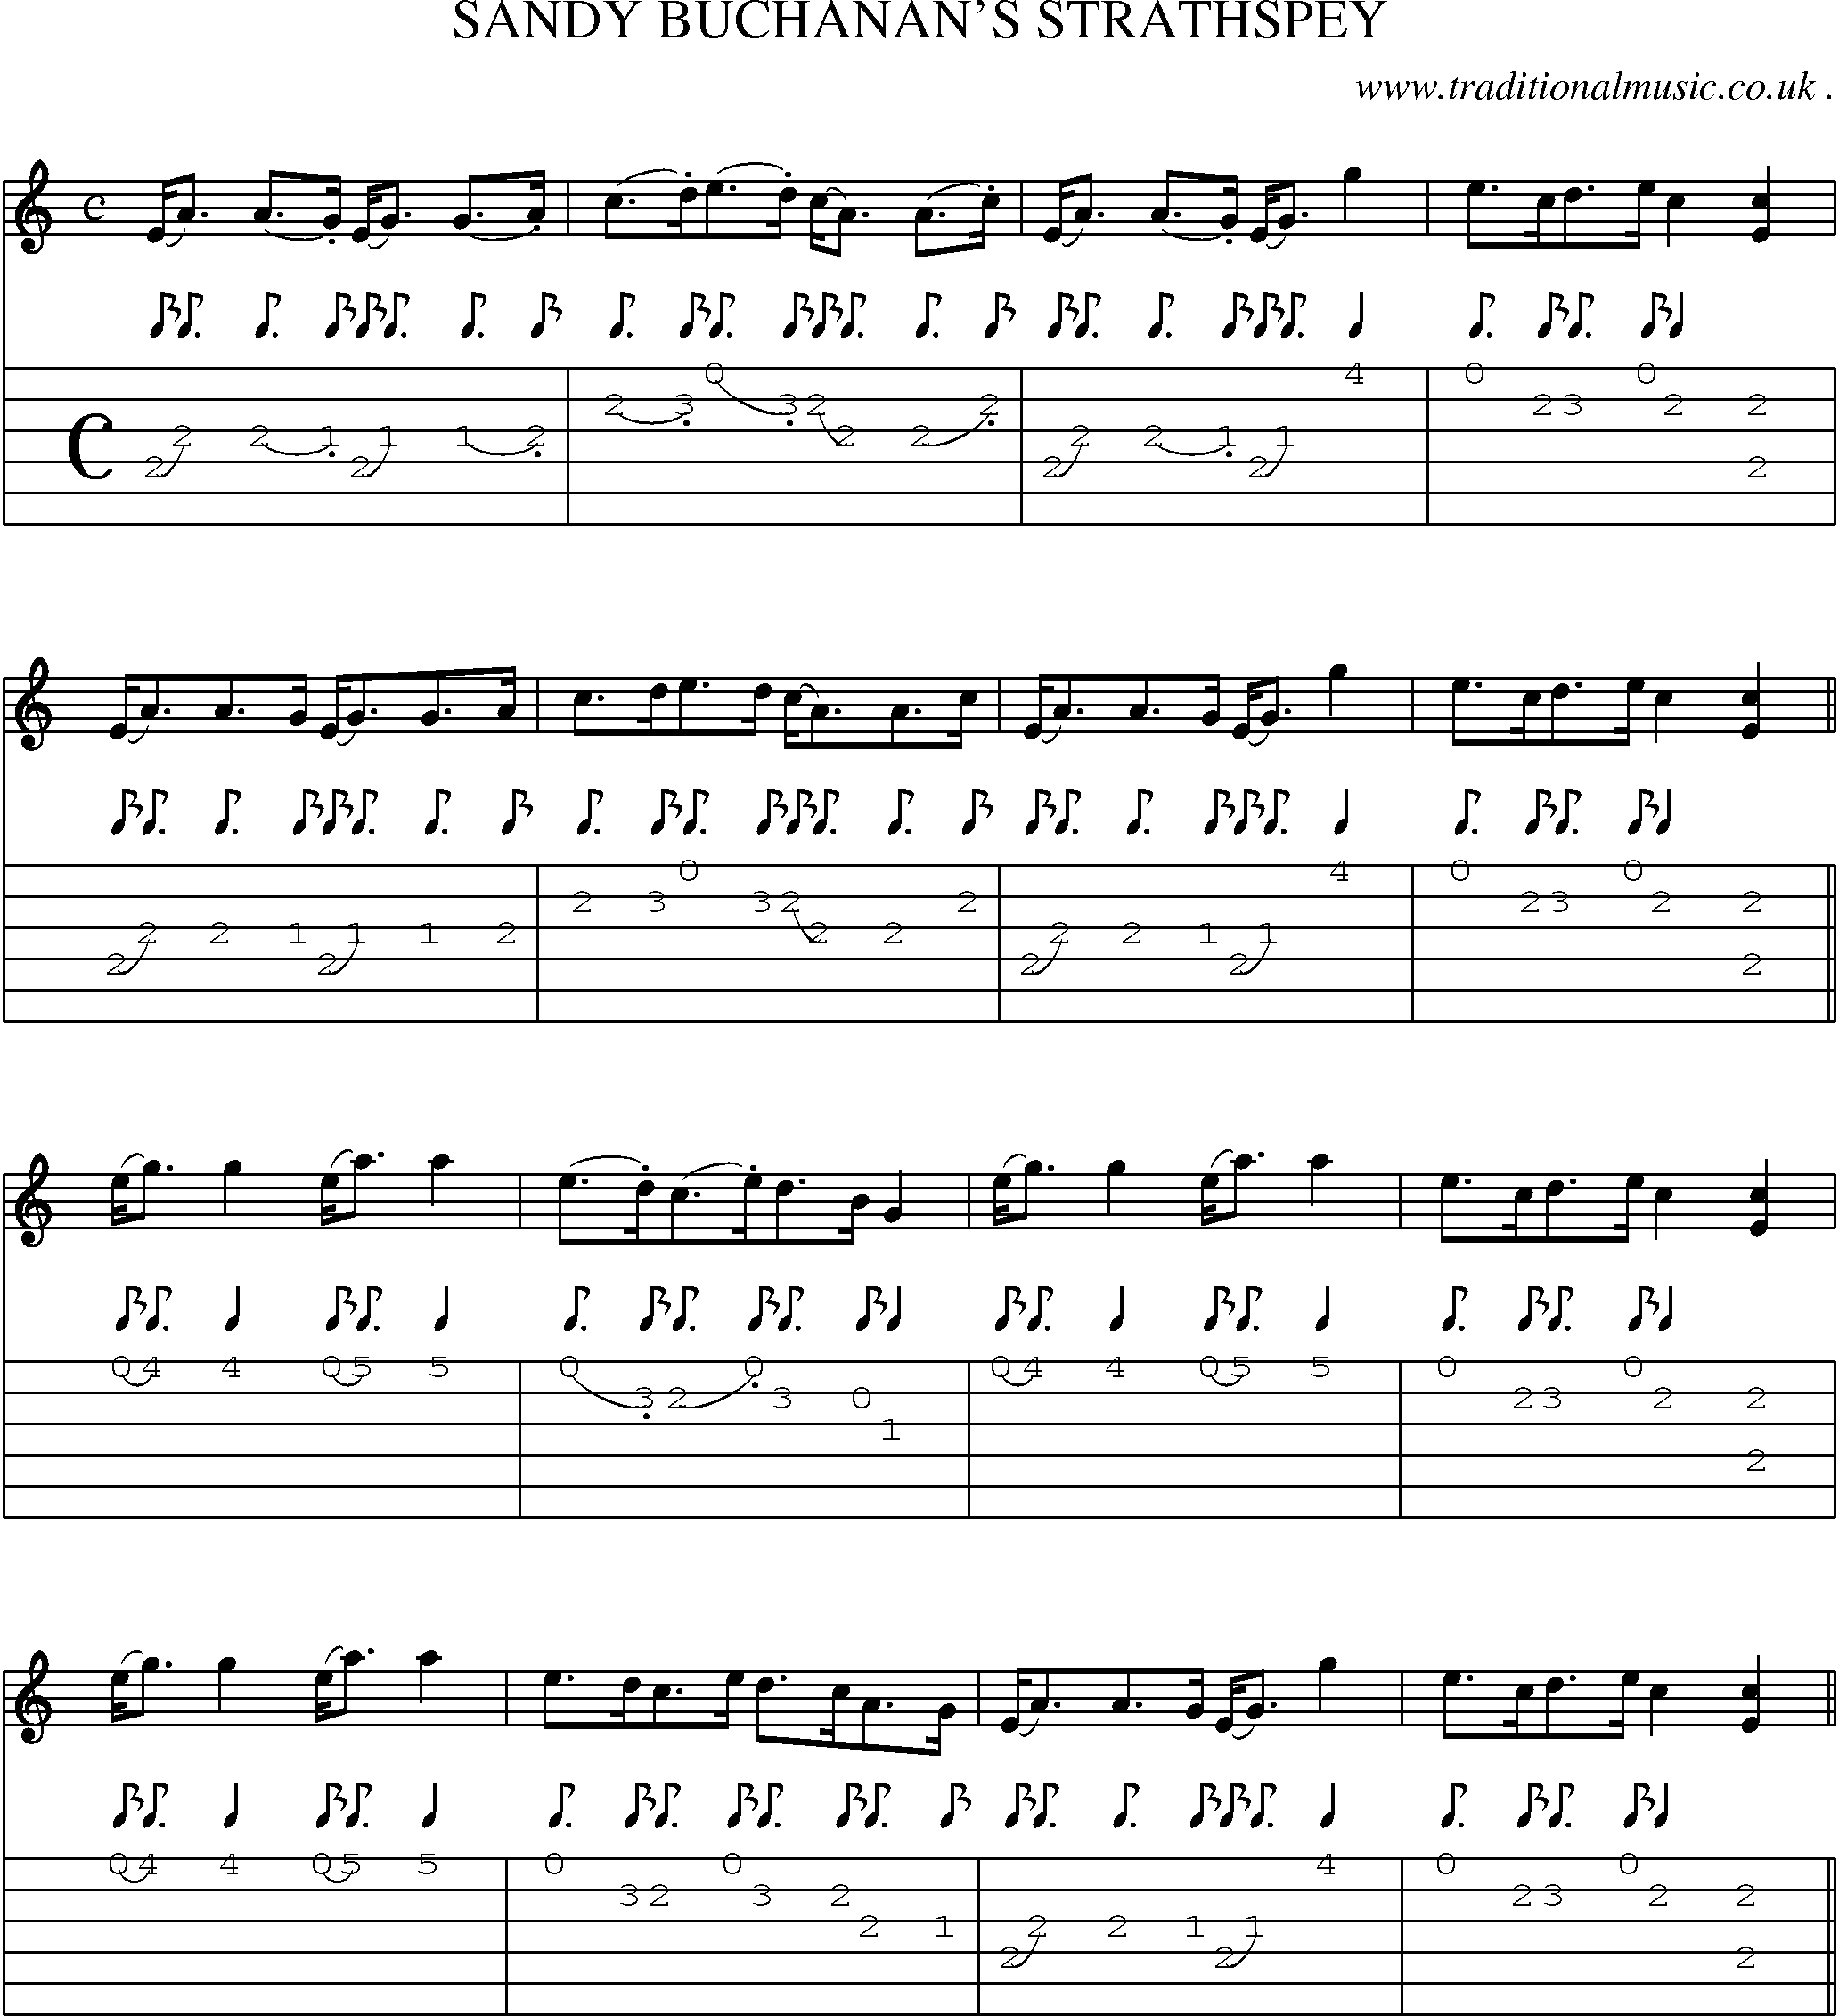 Sheet-Music and Guitar Tabs for Sandy Buchanans Strathspey